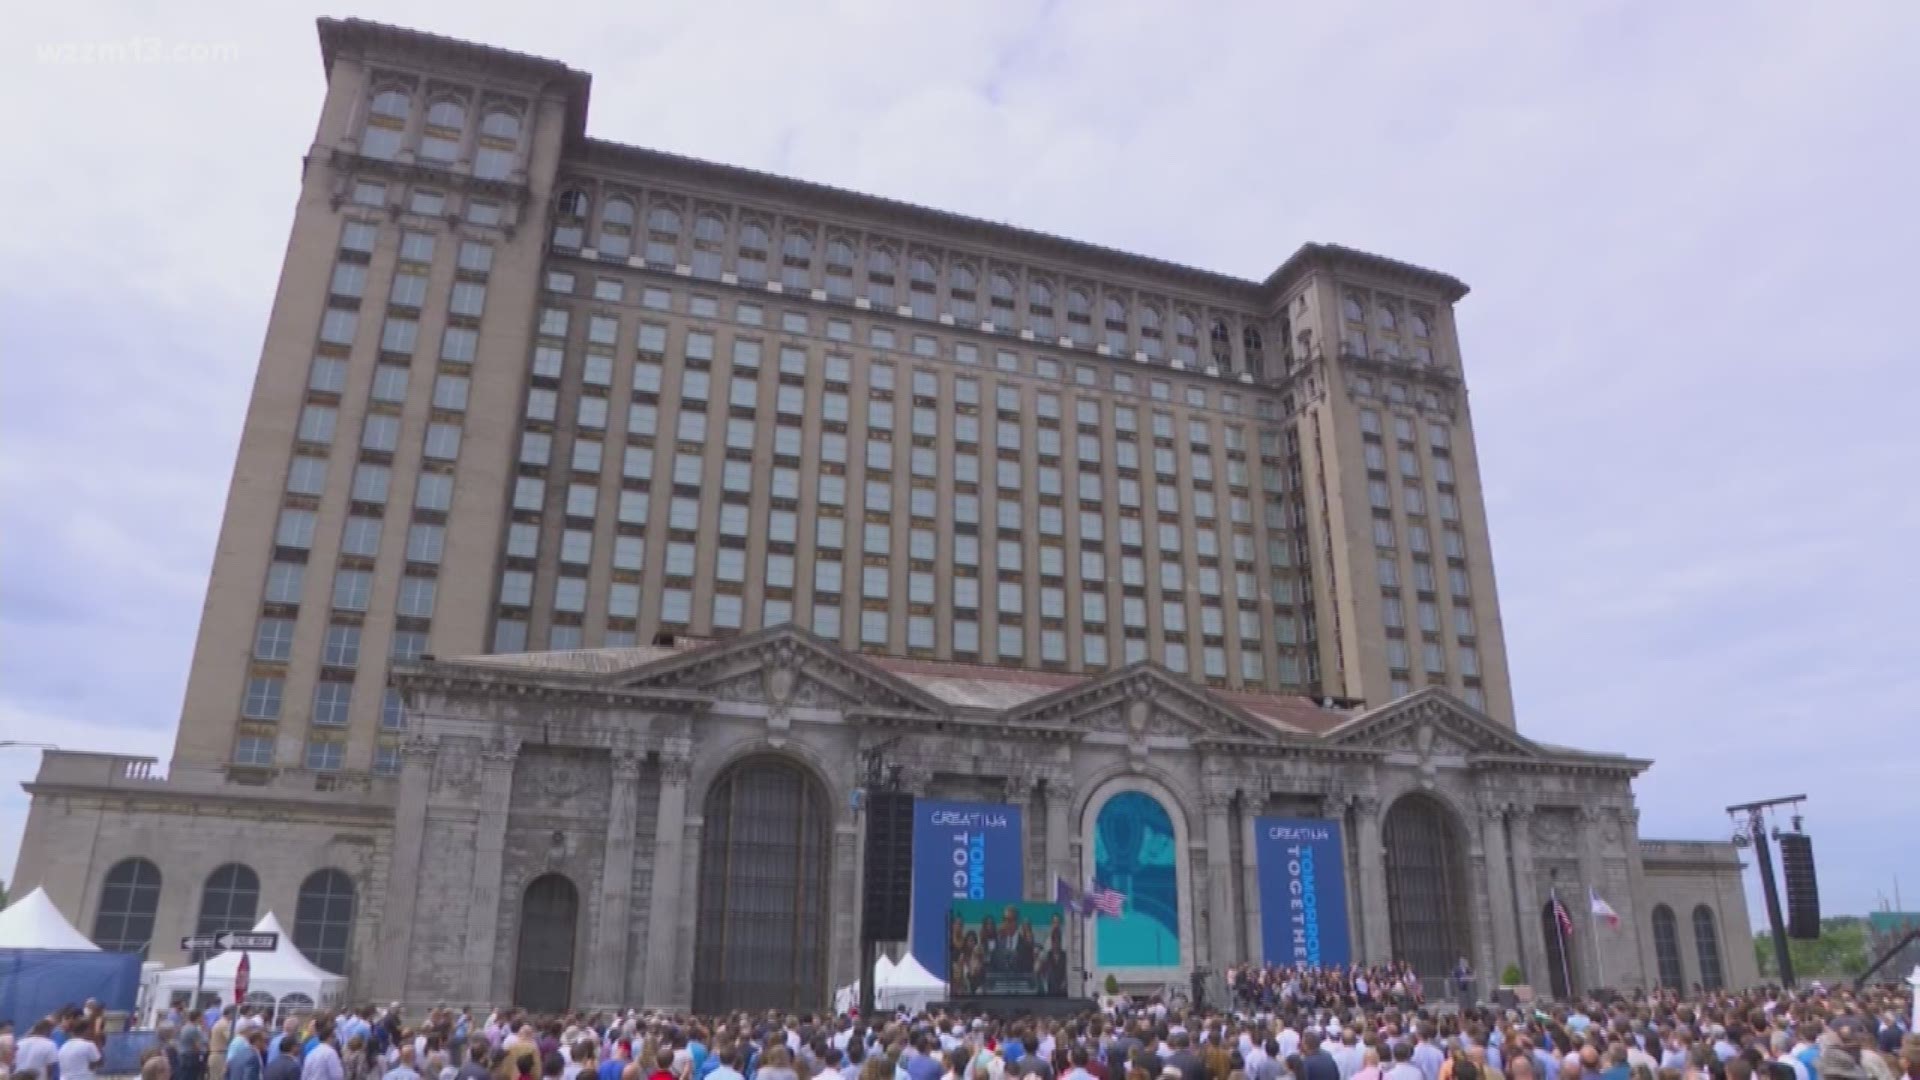 Plans for Michigan Central Station